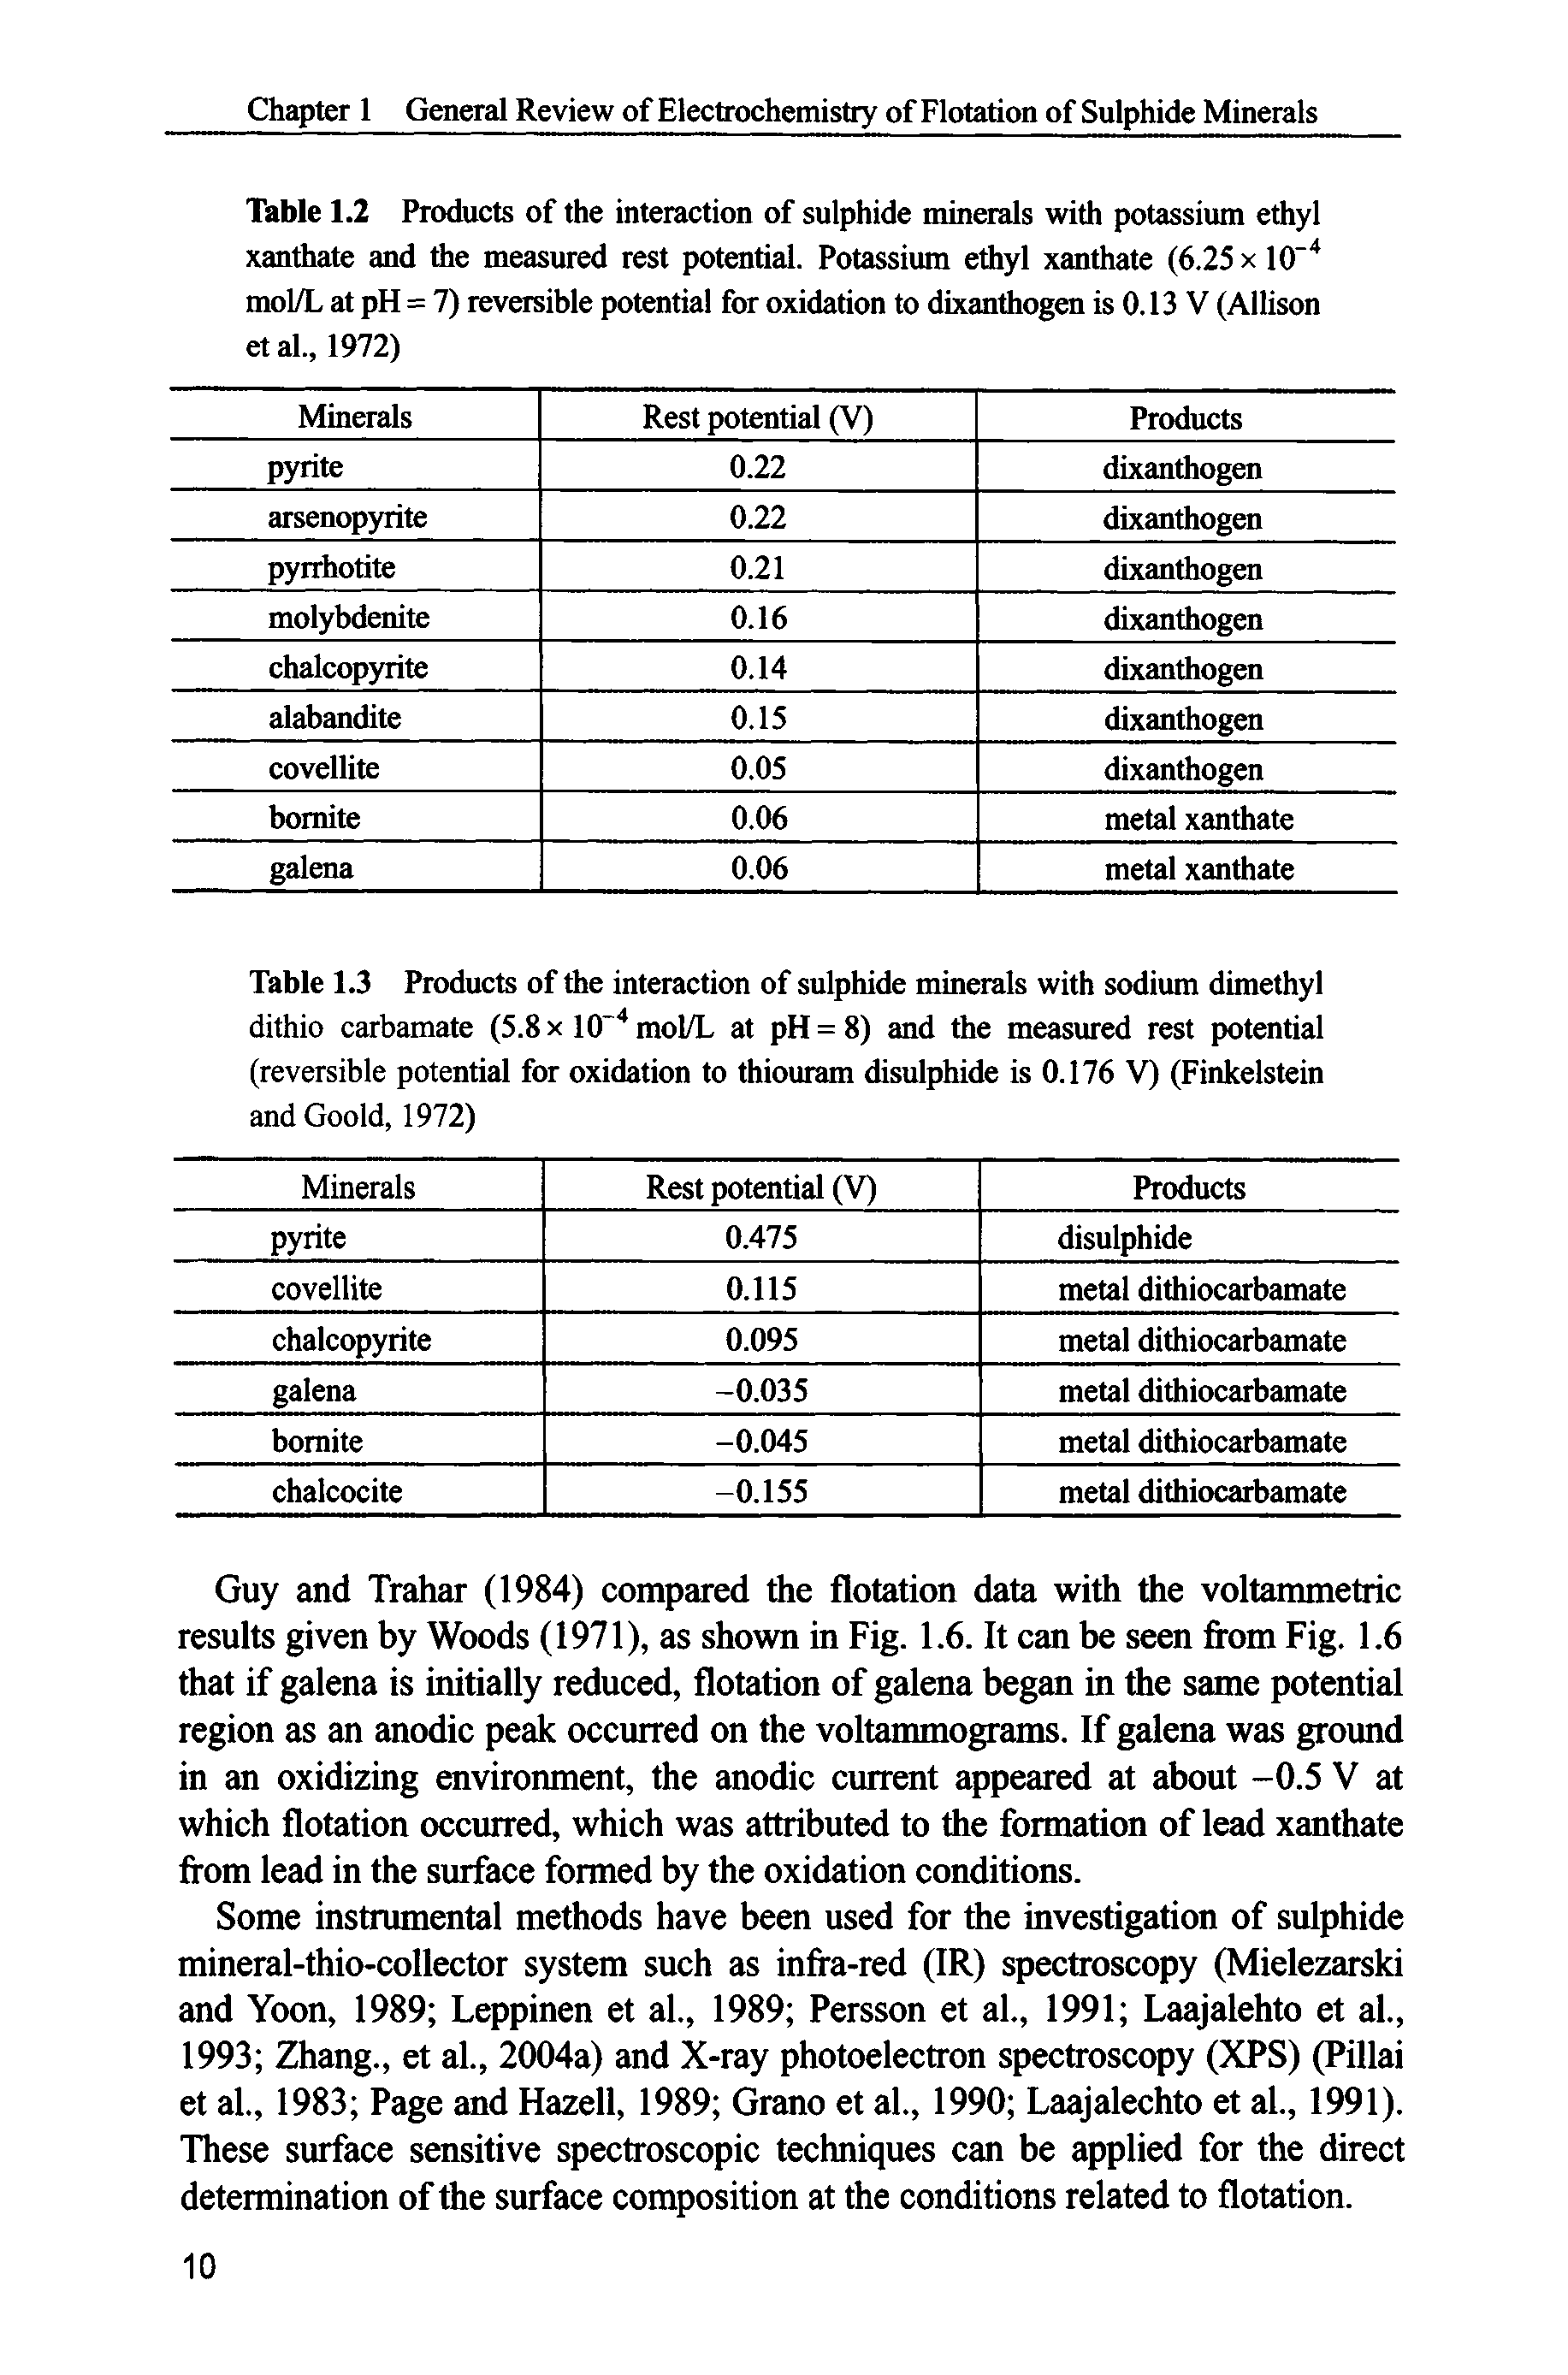 Table 1.2 Products of the interaction of sulphide minerals with potassium ethyl xanthate and the measured rest potential. Potassium ethyl xanthate (6.25 x 10 mol/L at pH = 7) reversible potential for oxidation to dixanthogen is 0.13 V (Allison et al., 1972)...